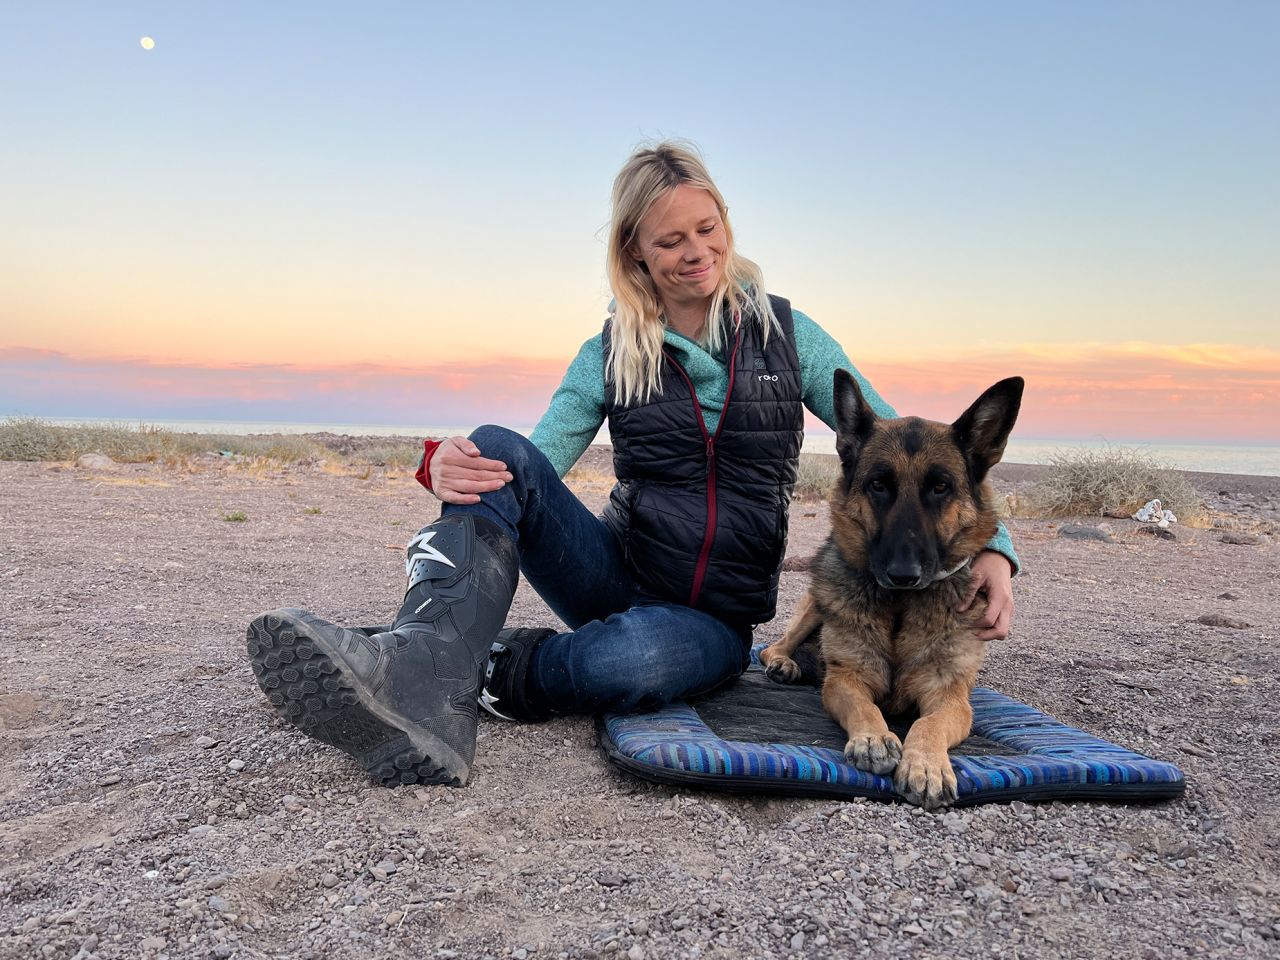 Jess Stone had been riding around the world with her husband Greg and dog Moxie. However, the German Shephard passed away in March.